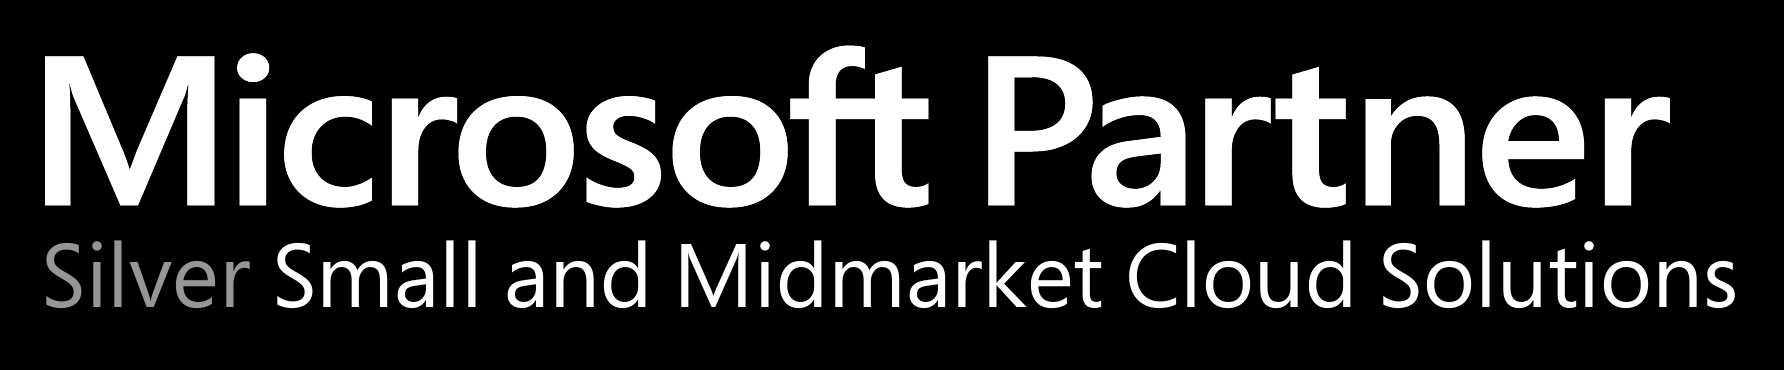 Microsoft Partner - Silver Small and Midmarket Cloud Solutions Competency Logo